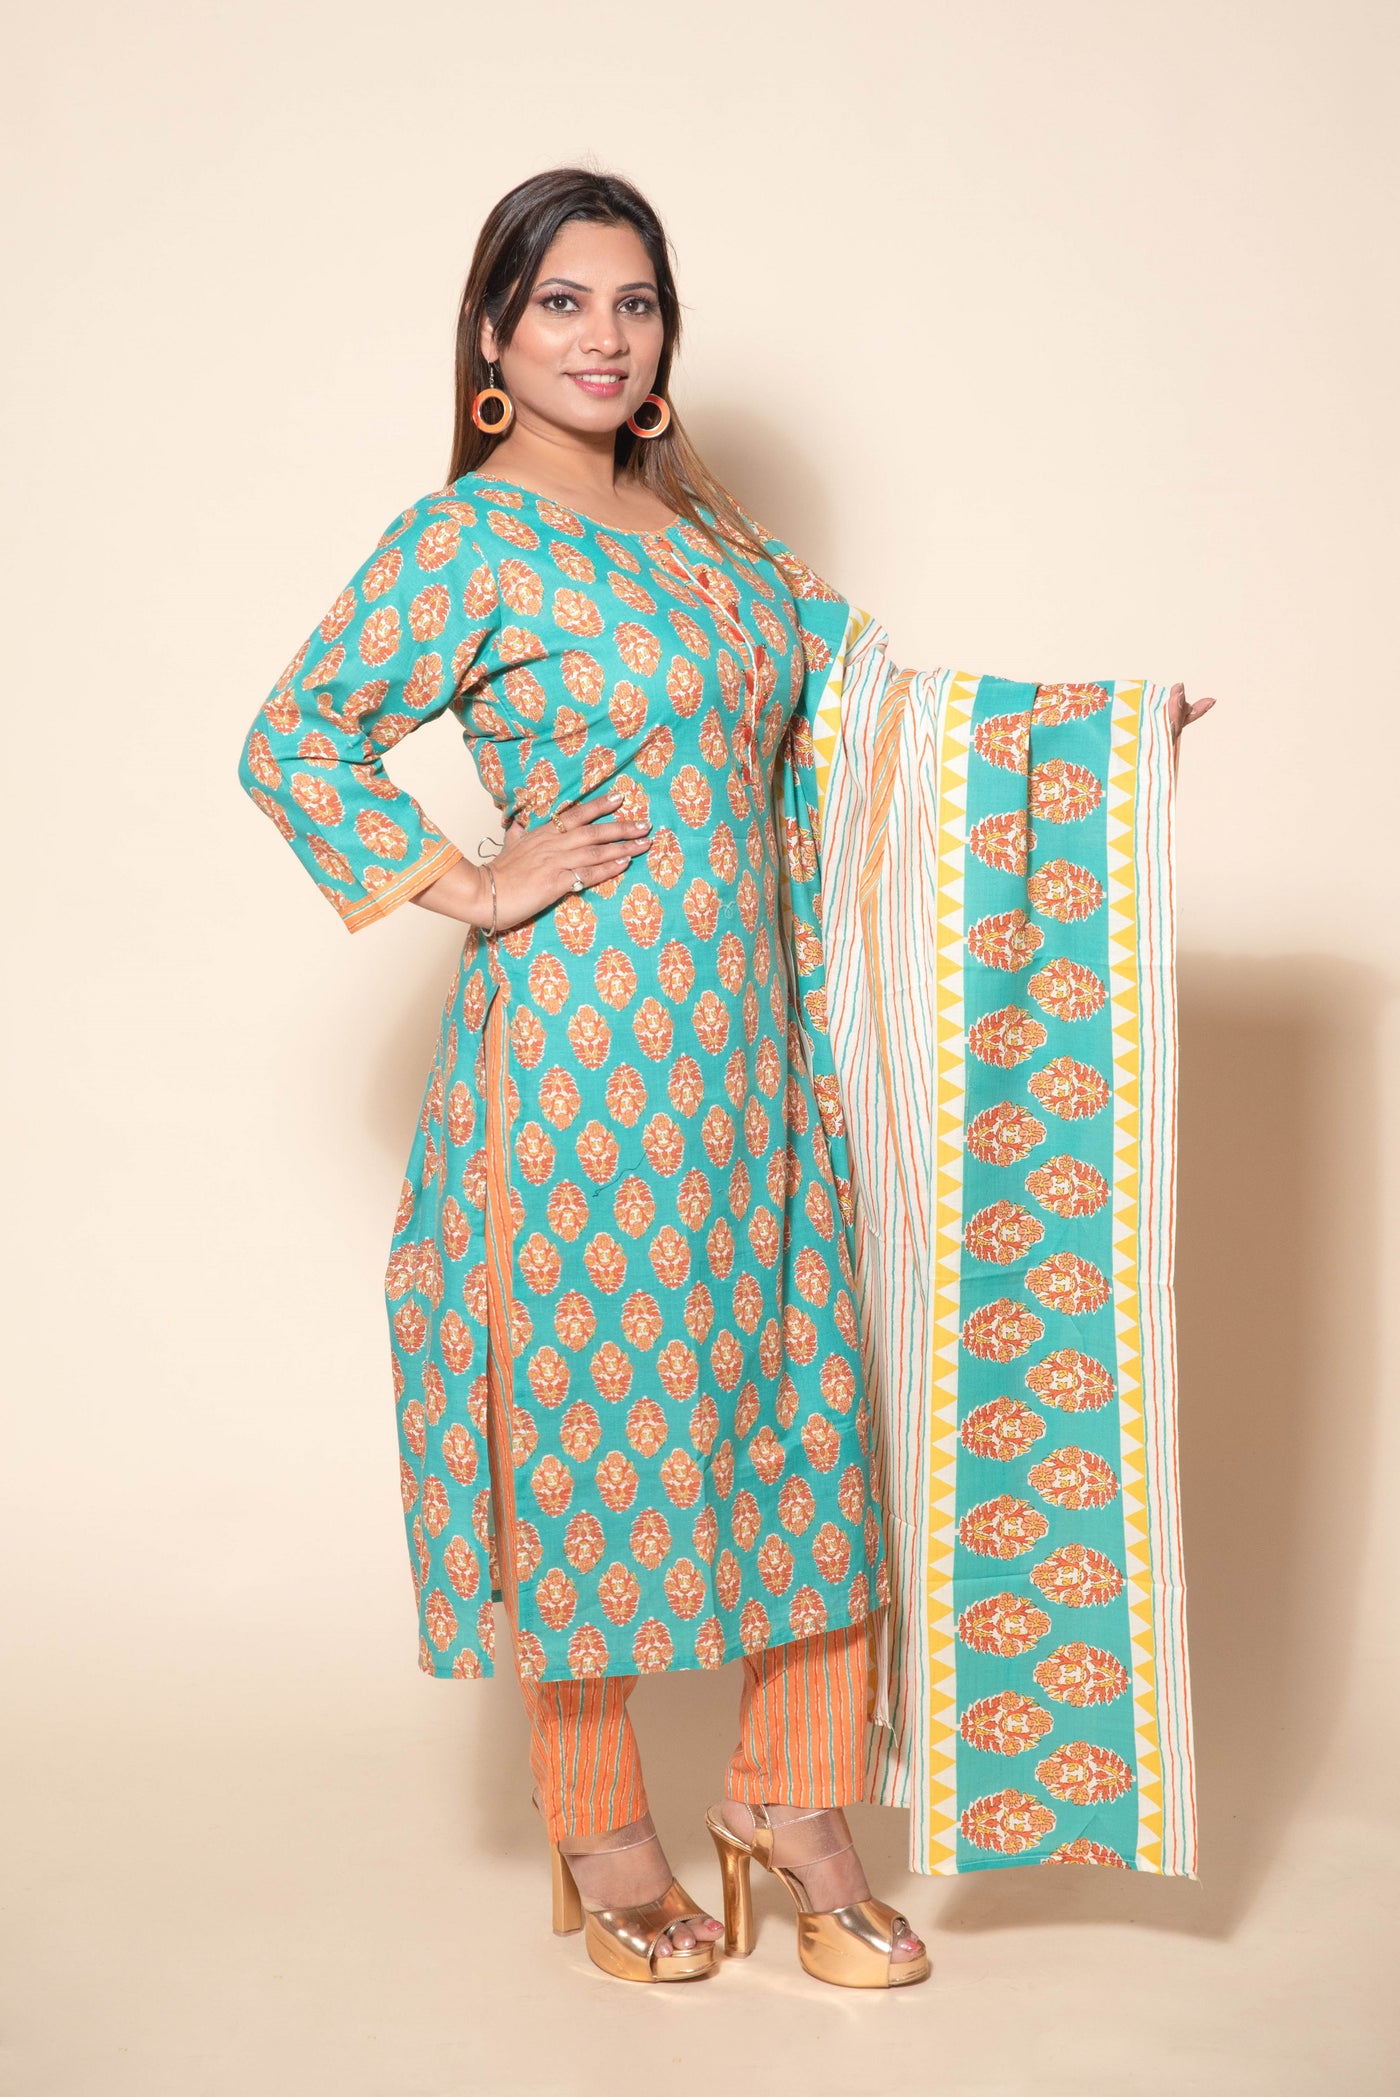 model posing in printed cotton suit